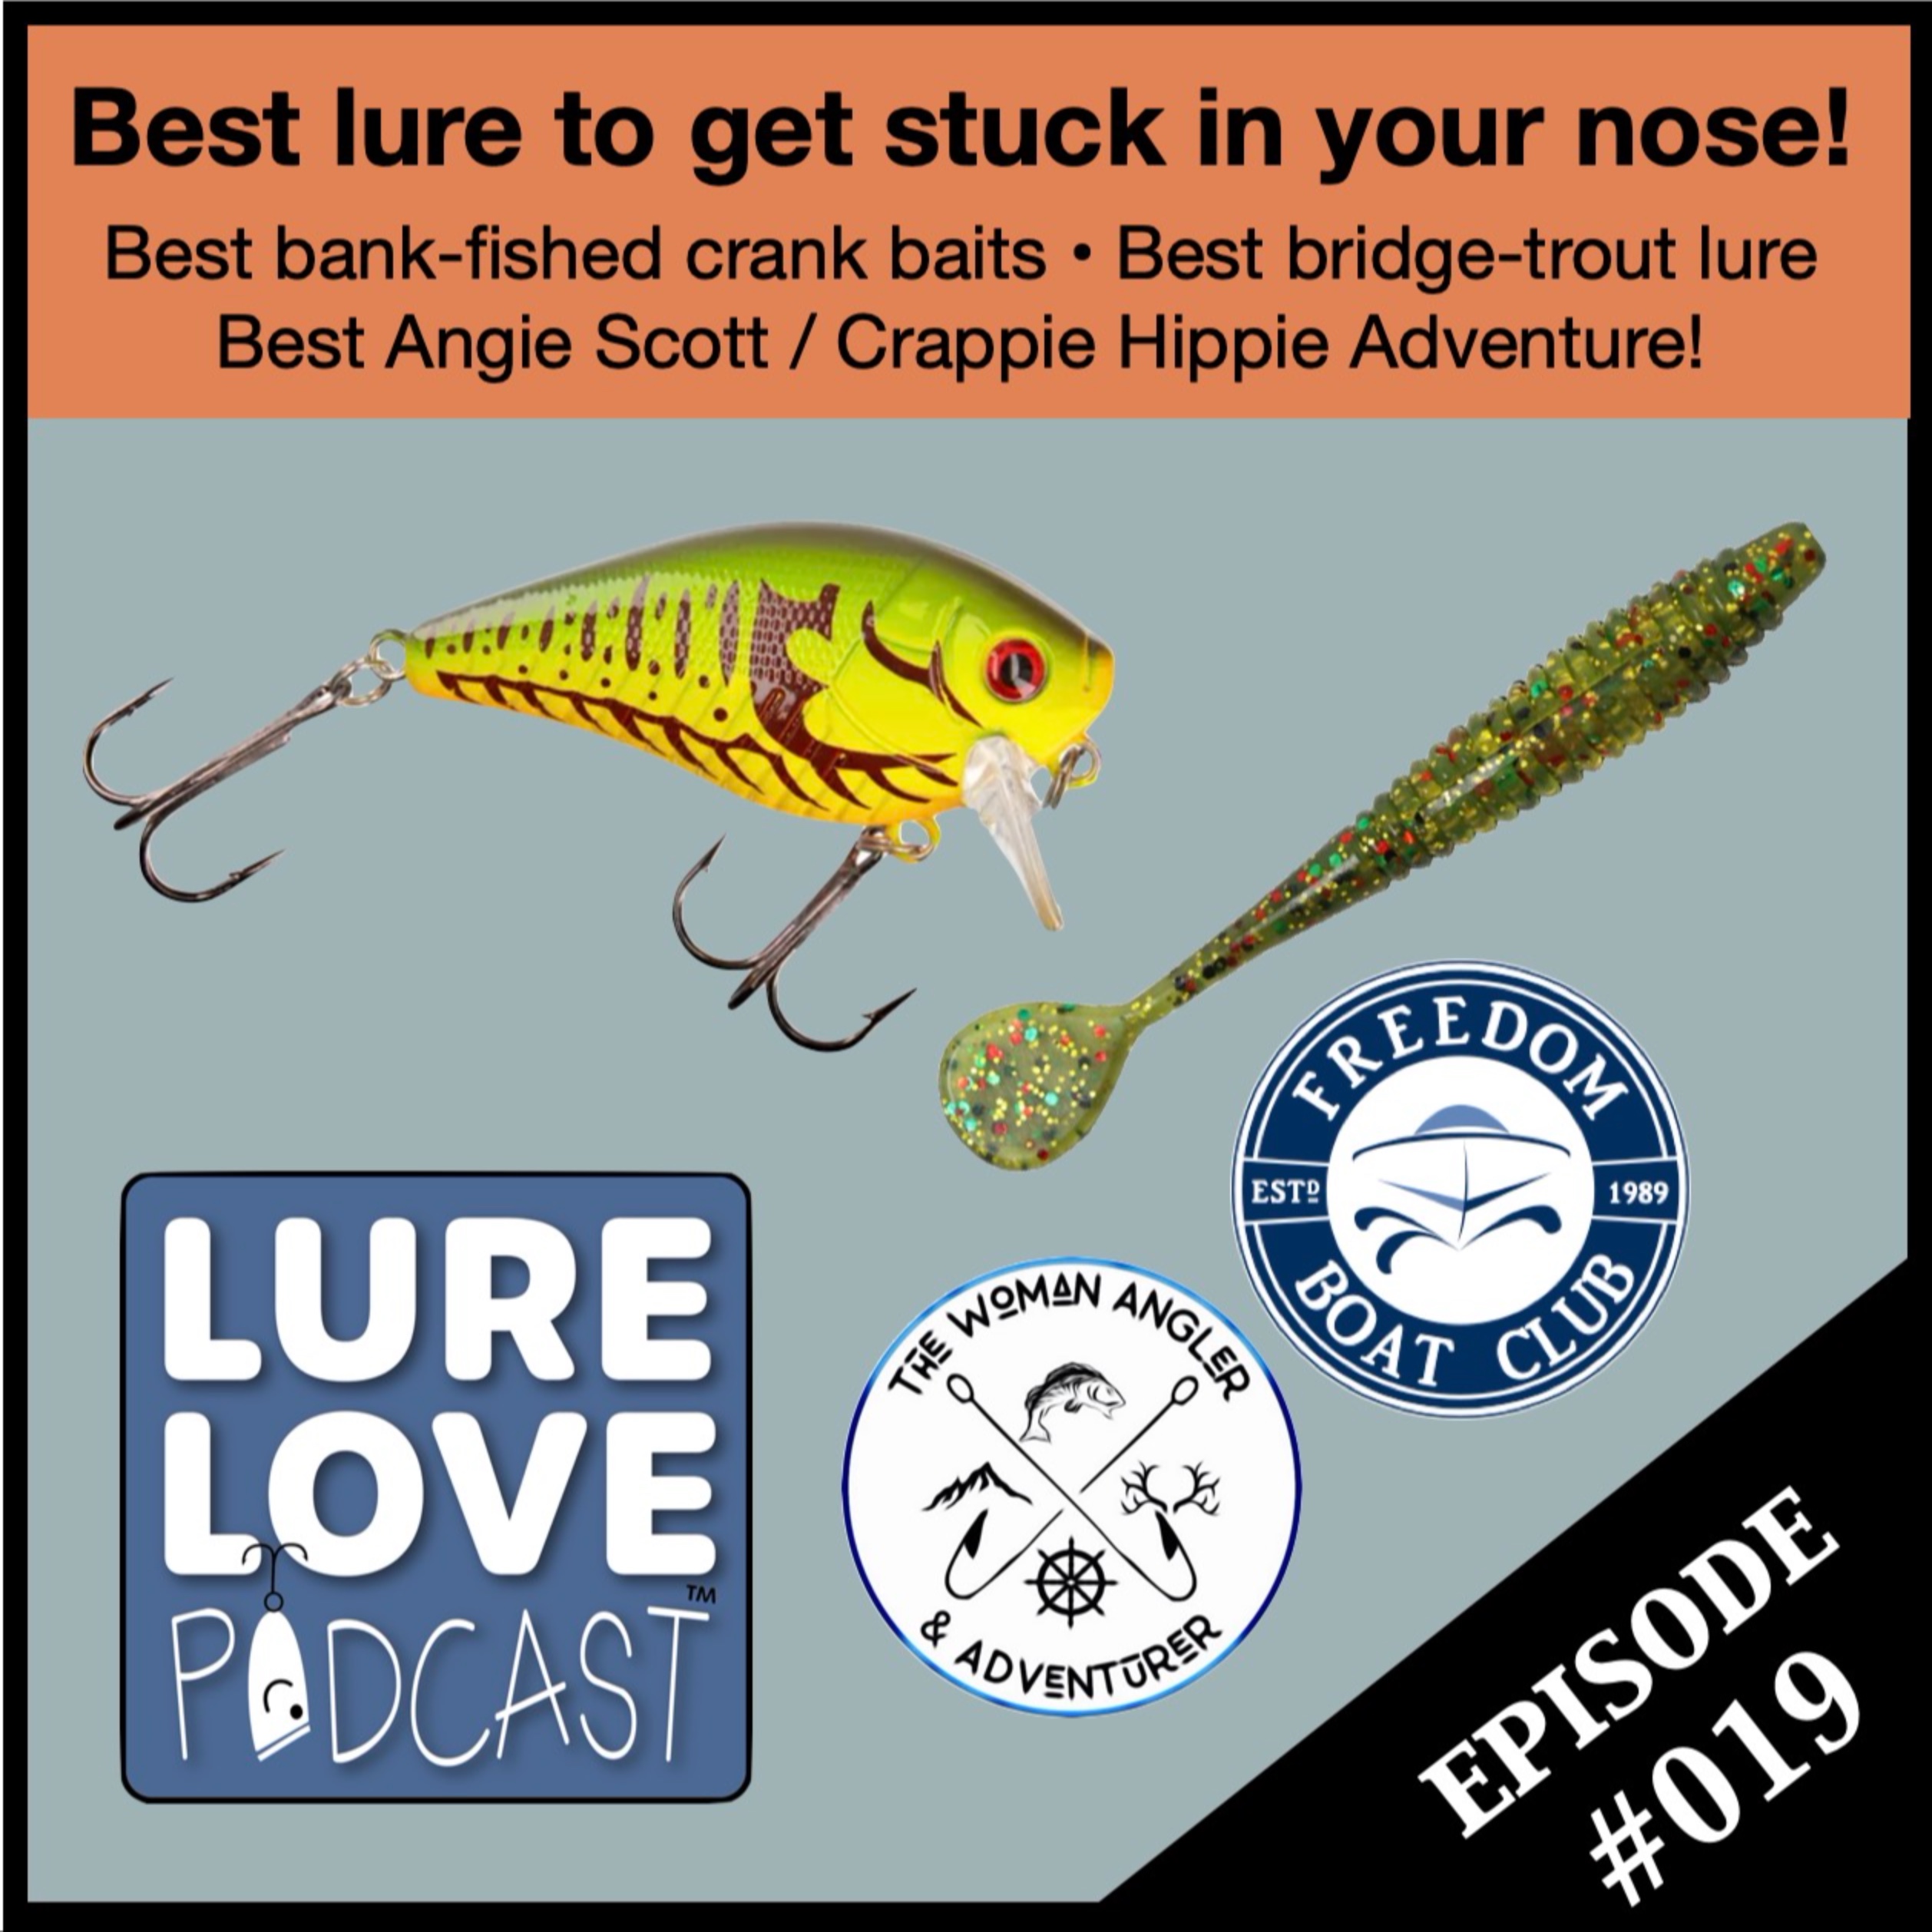 The best lure to get stuck in your nose! Image